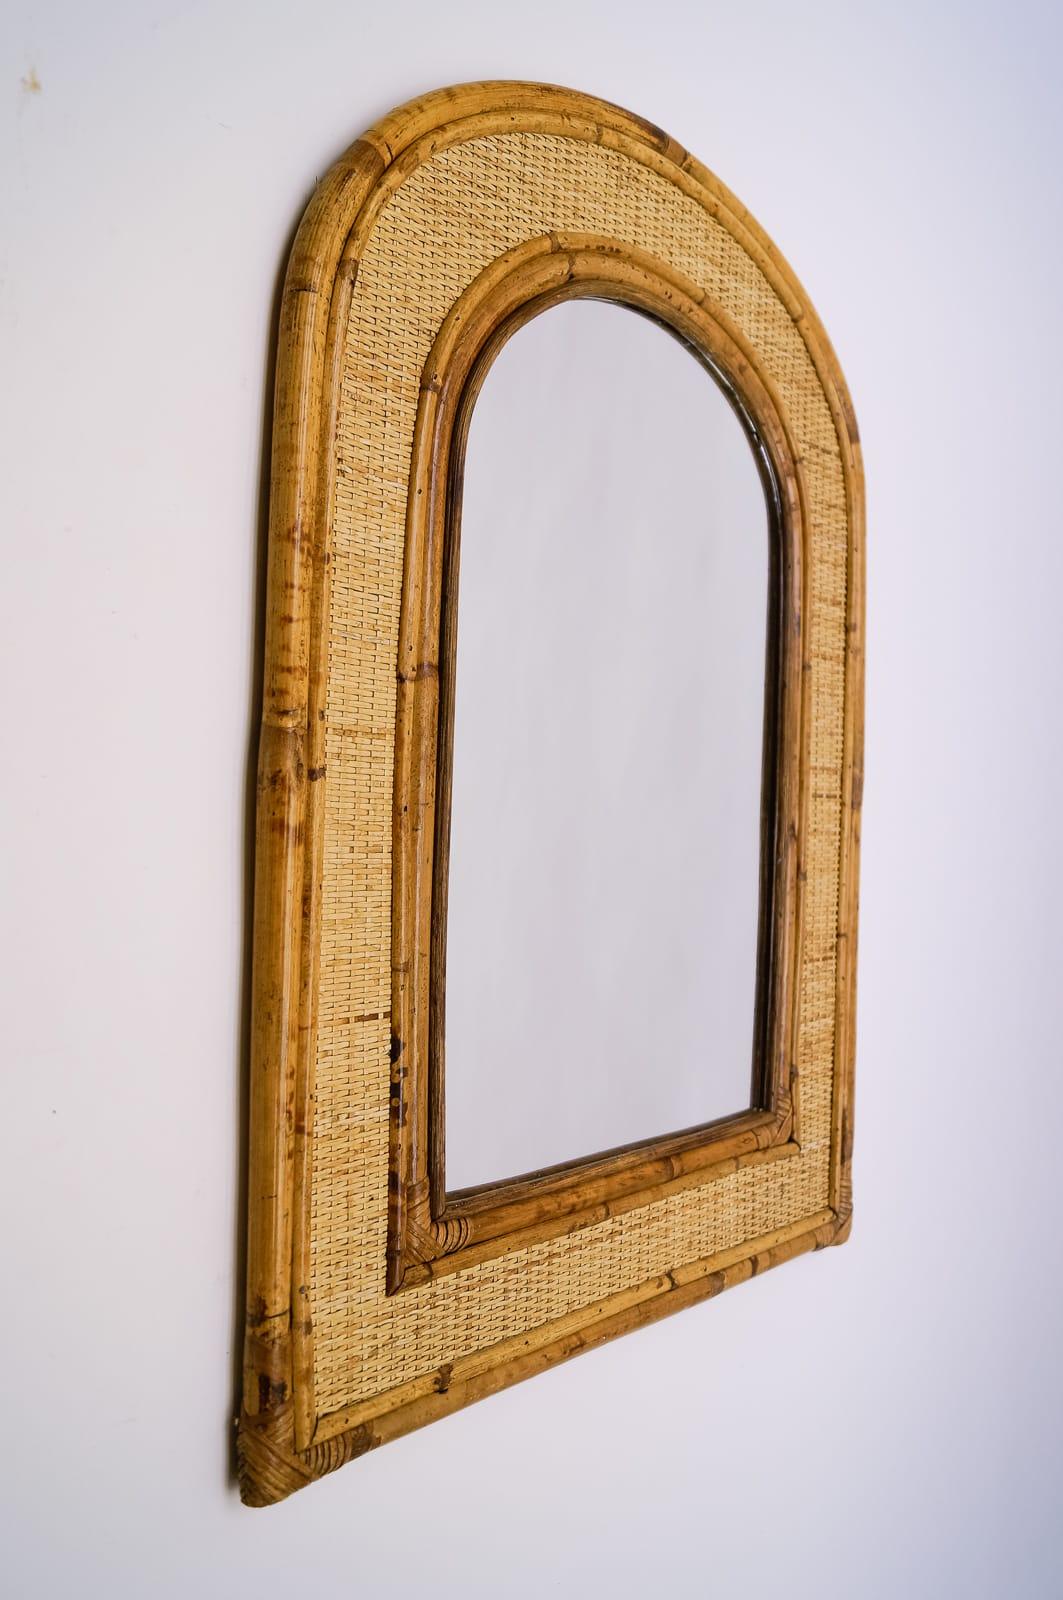 Vintage bamboo mirror with rounded top and woven wicker frame.
Rectangular bamboo framed mirror with bent bamboo details and original wood backing.
Finished in all sizes with original wood backing. Hanging hook in the back.
Size: 30” height x 22”